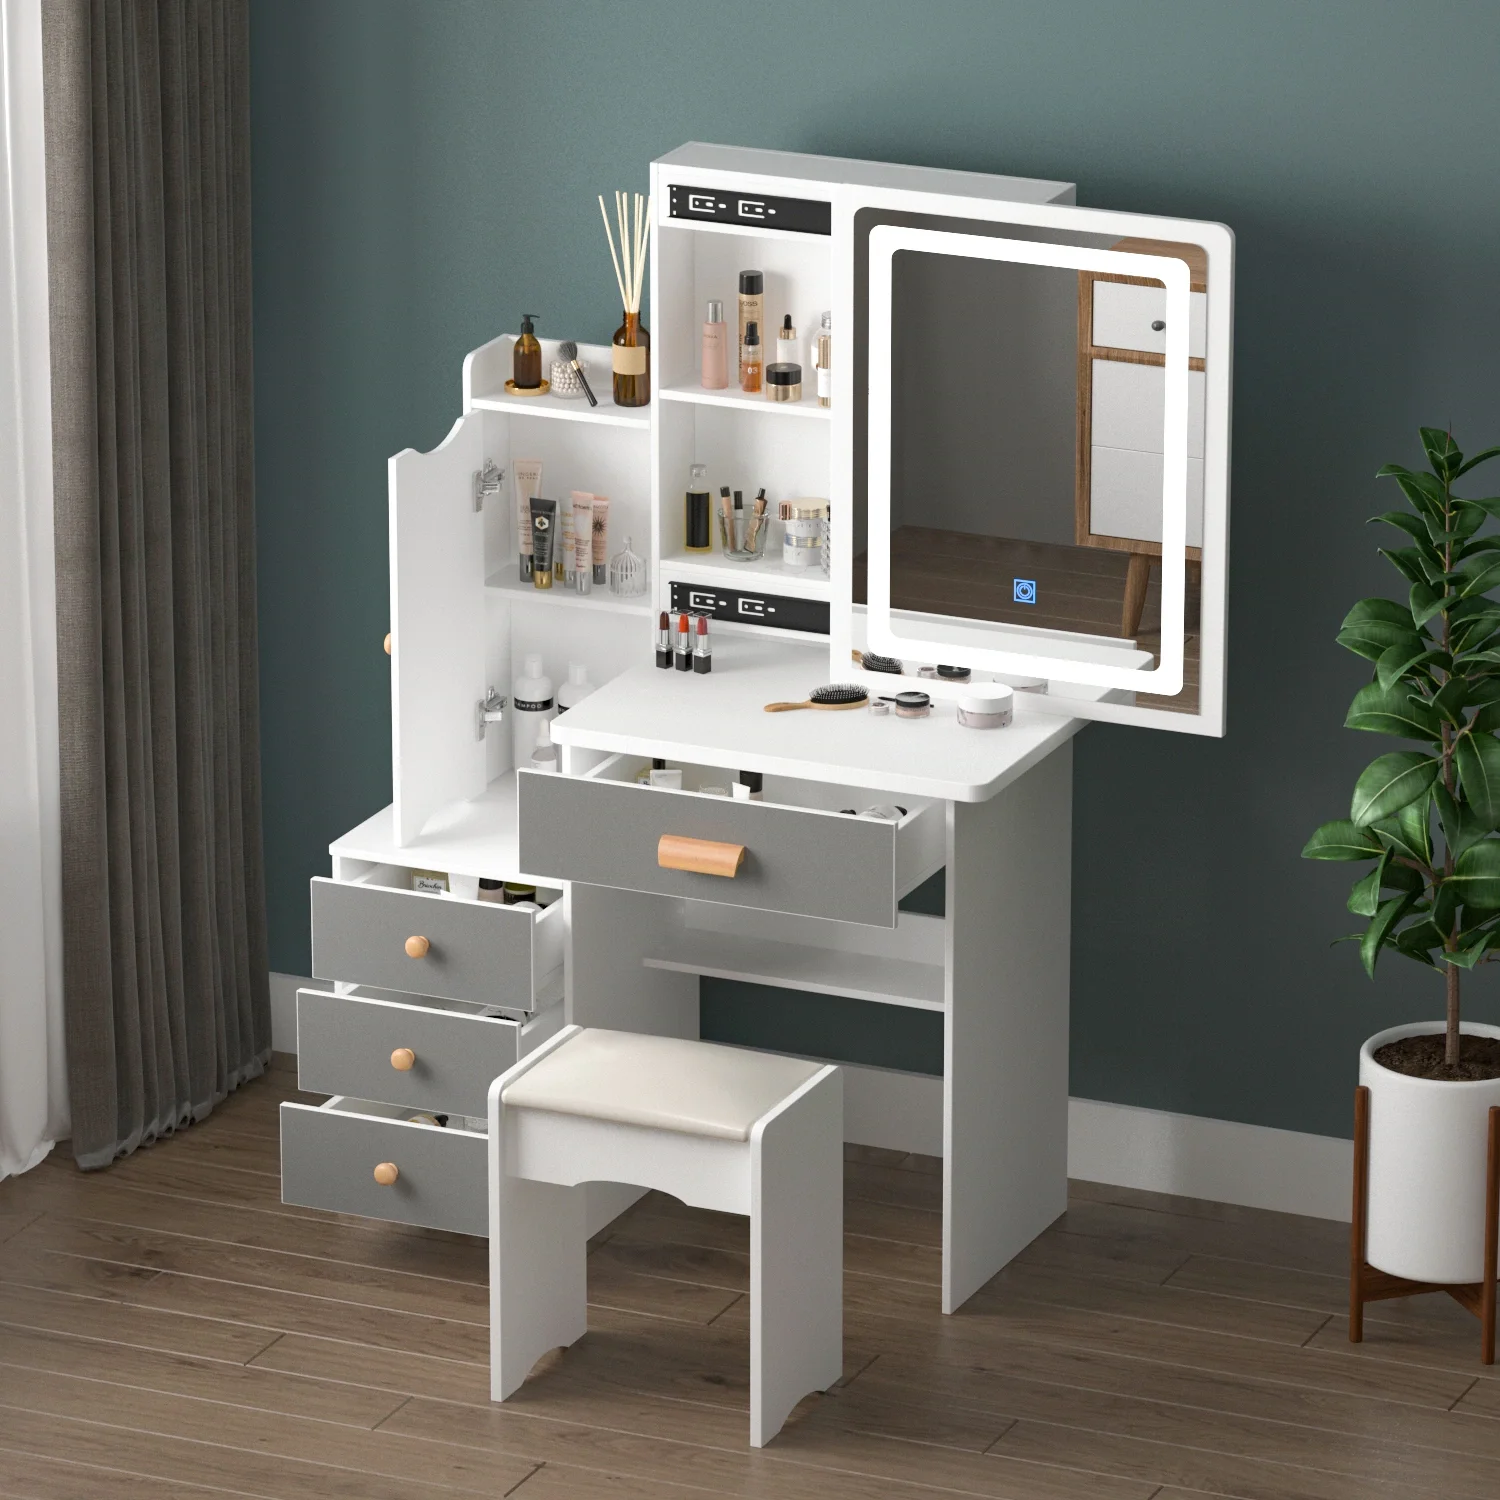 hot selling bed room mirrored Makeup Vanity Set with Sliding Adjustable Lighted Mirror & Stool   Hidden Shelves (1600363269376)